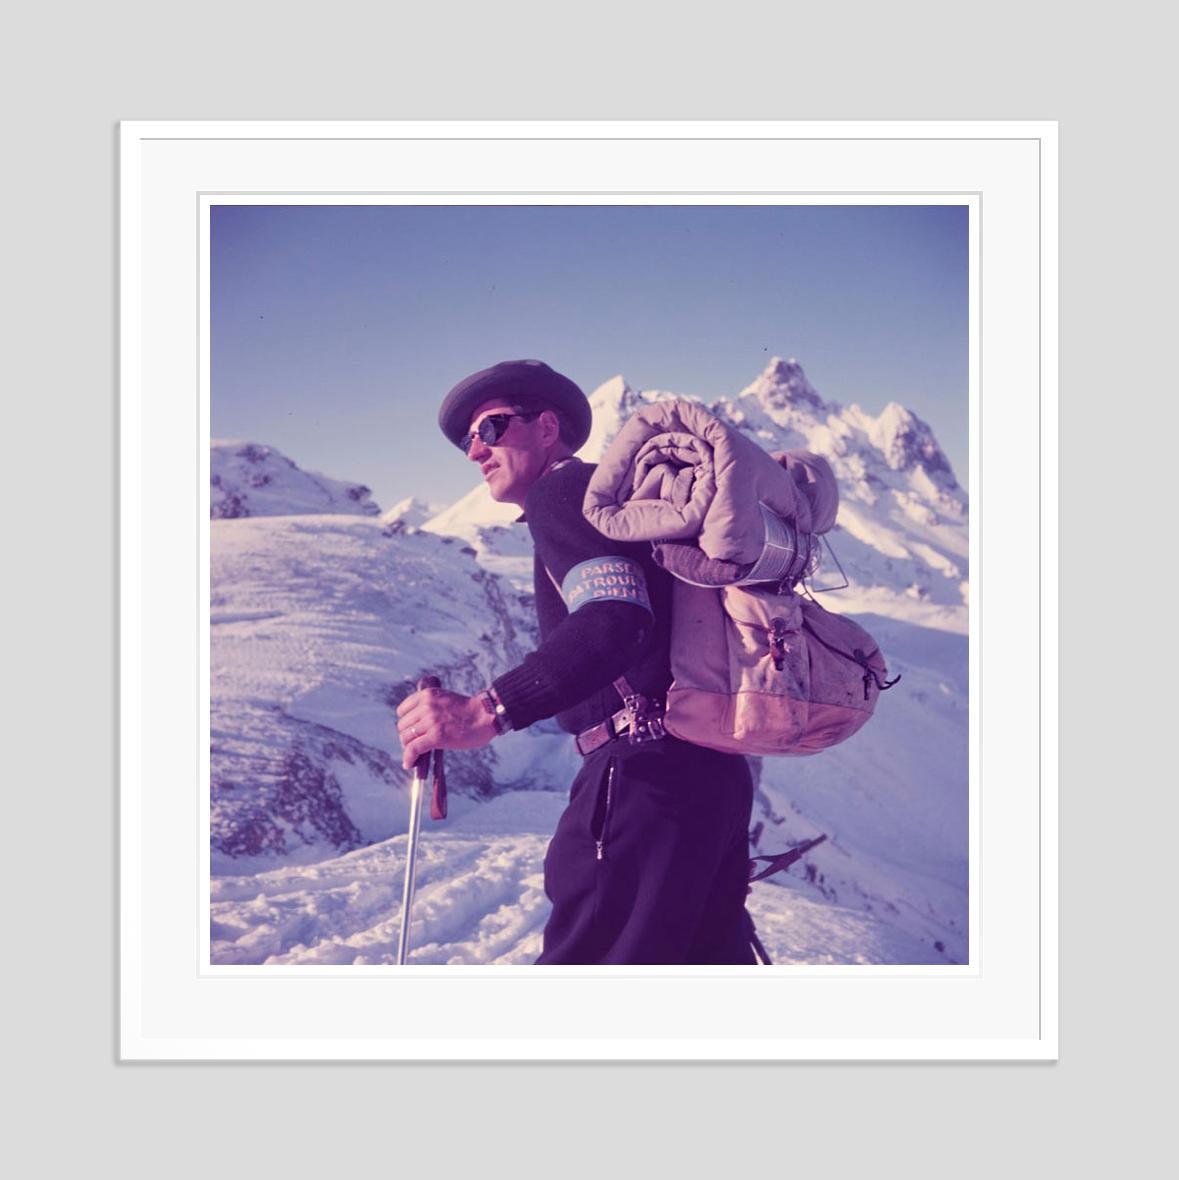 Mountain Top

1951

A member of the Klosters ski patrol, Switzerland, 1951.

by Toni Frissell

30 x 30